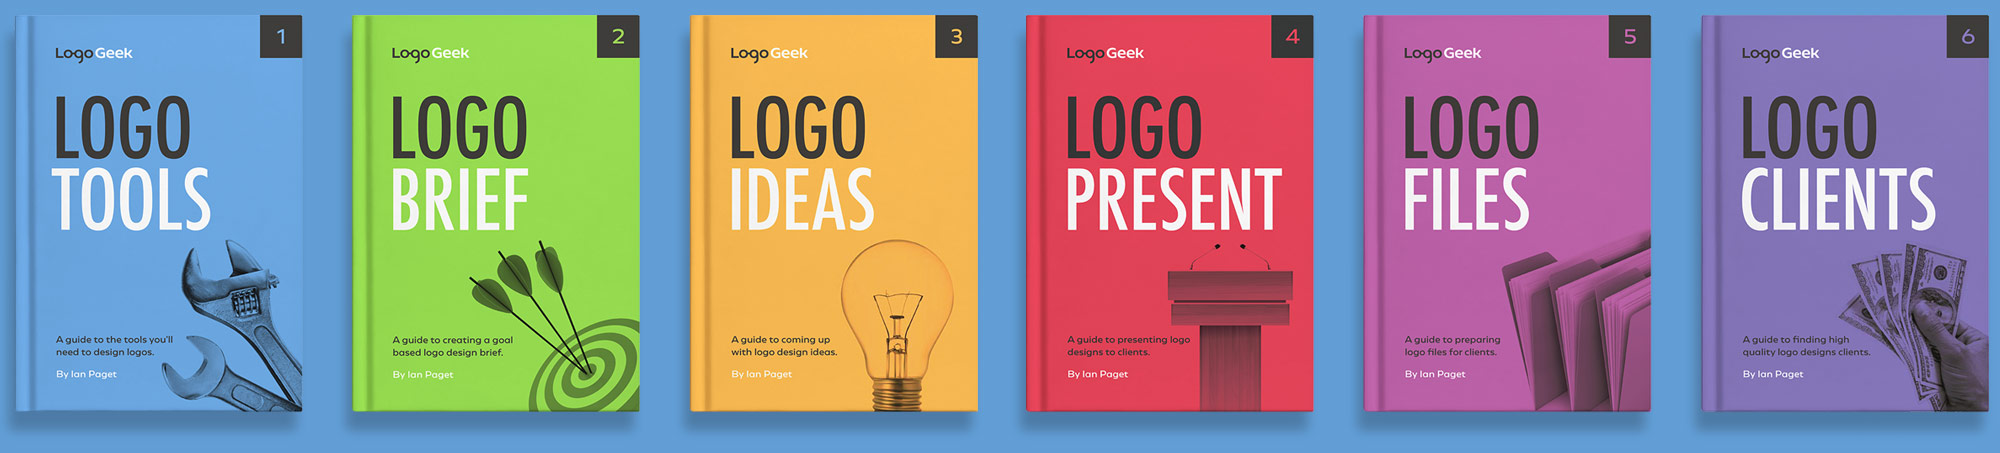 The logo designers book collection